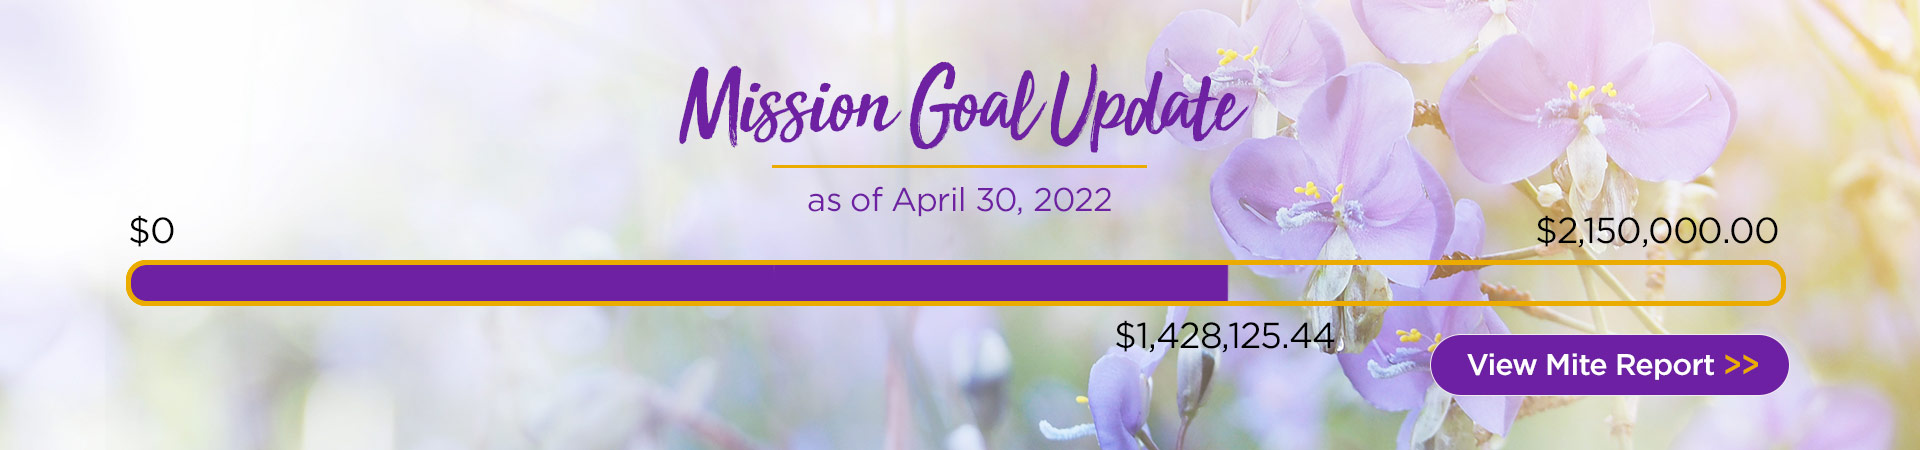 Mission Goal Update as of April 30, 2022. View Mite Report.